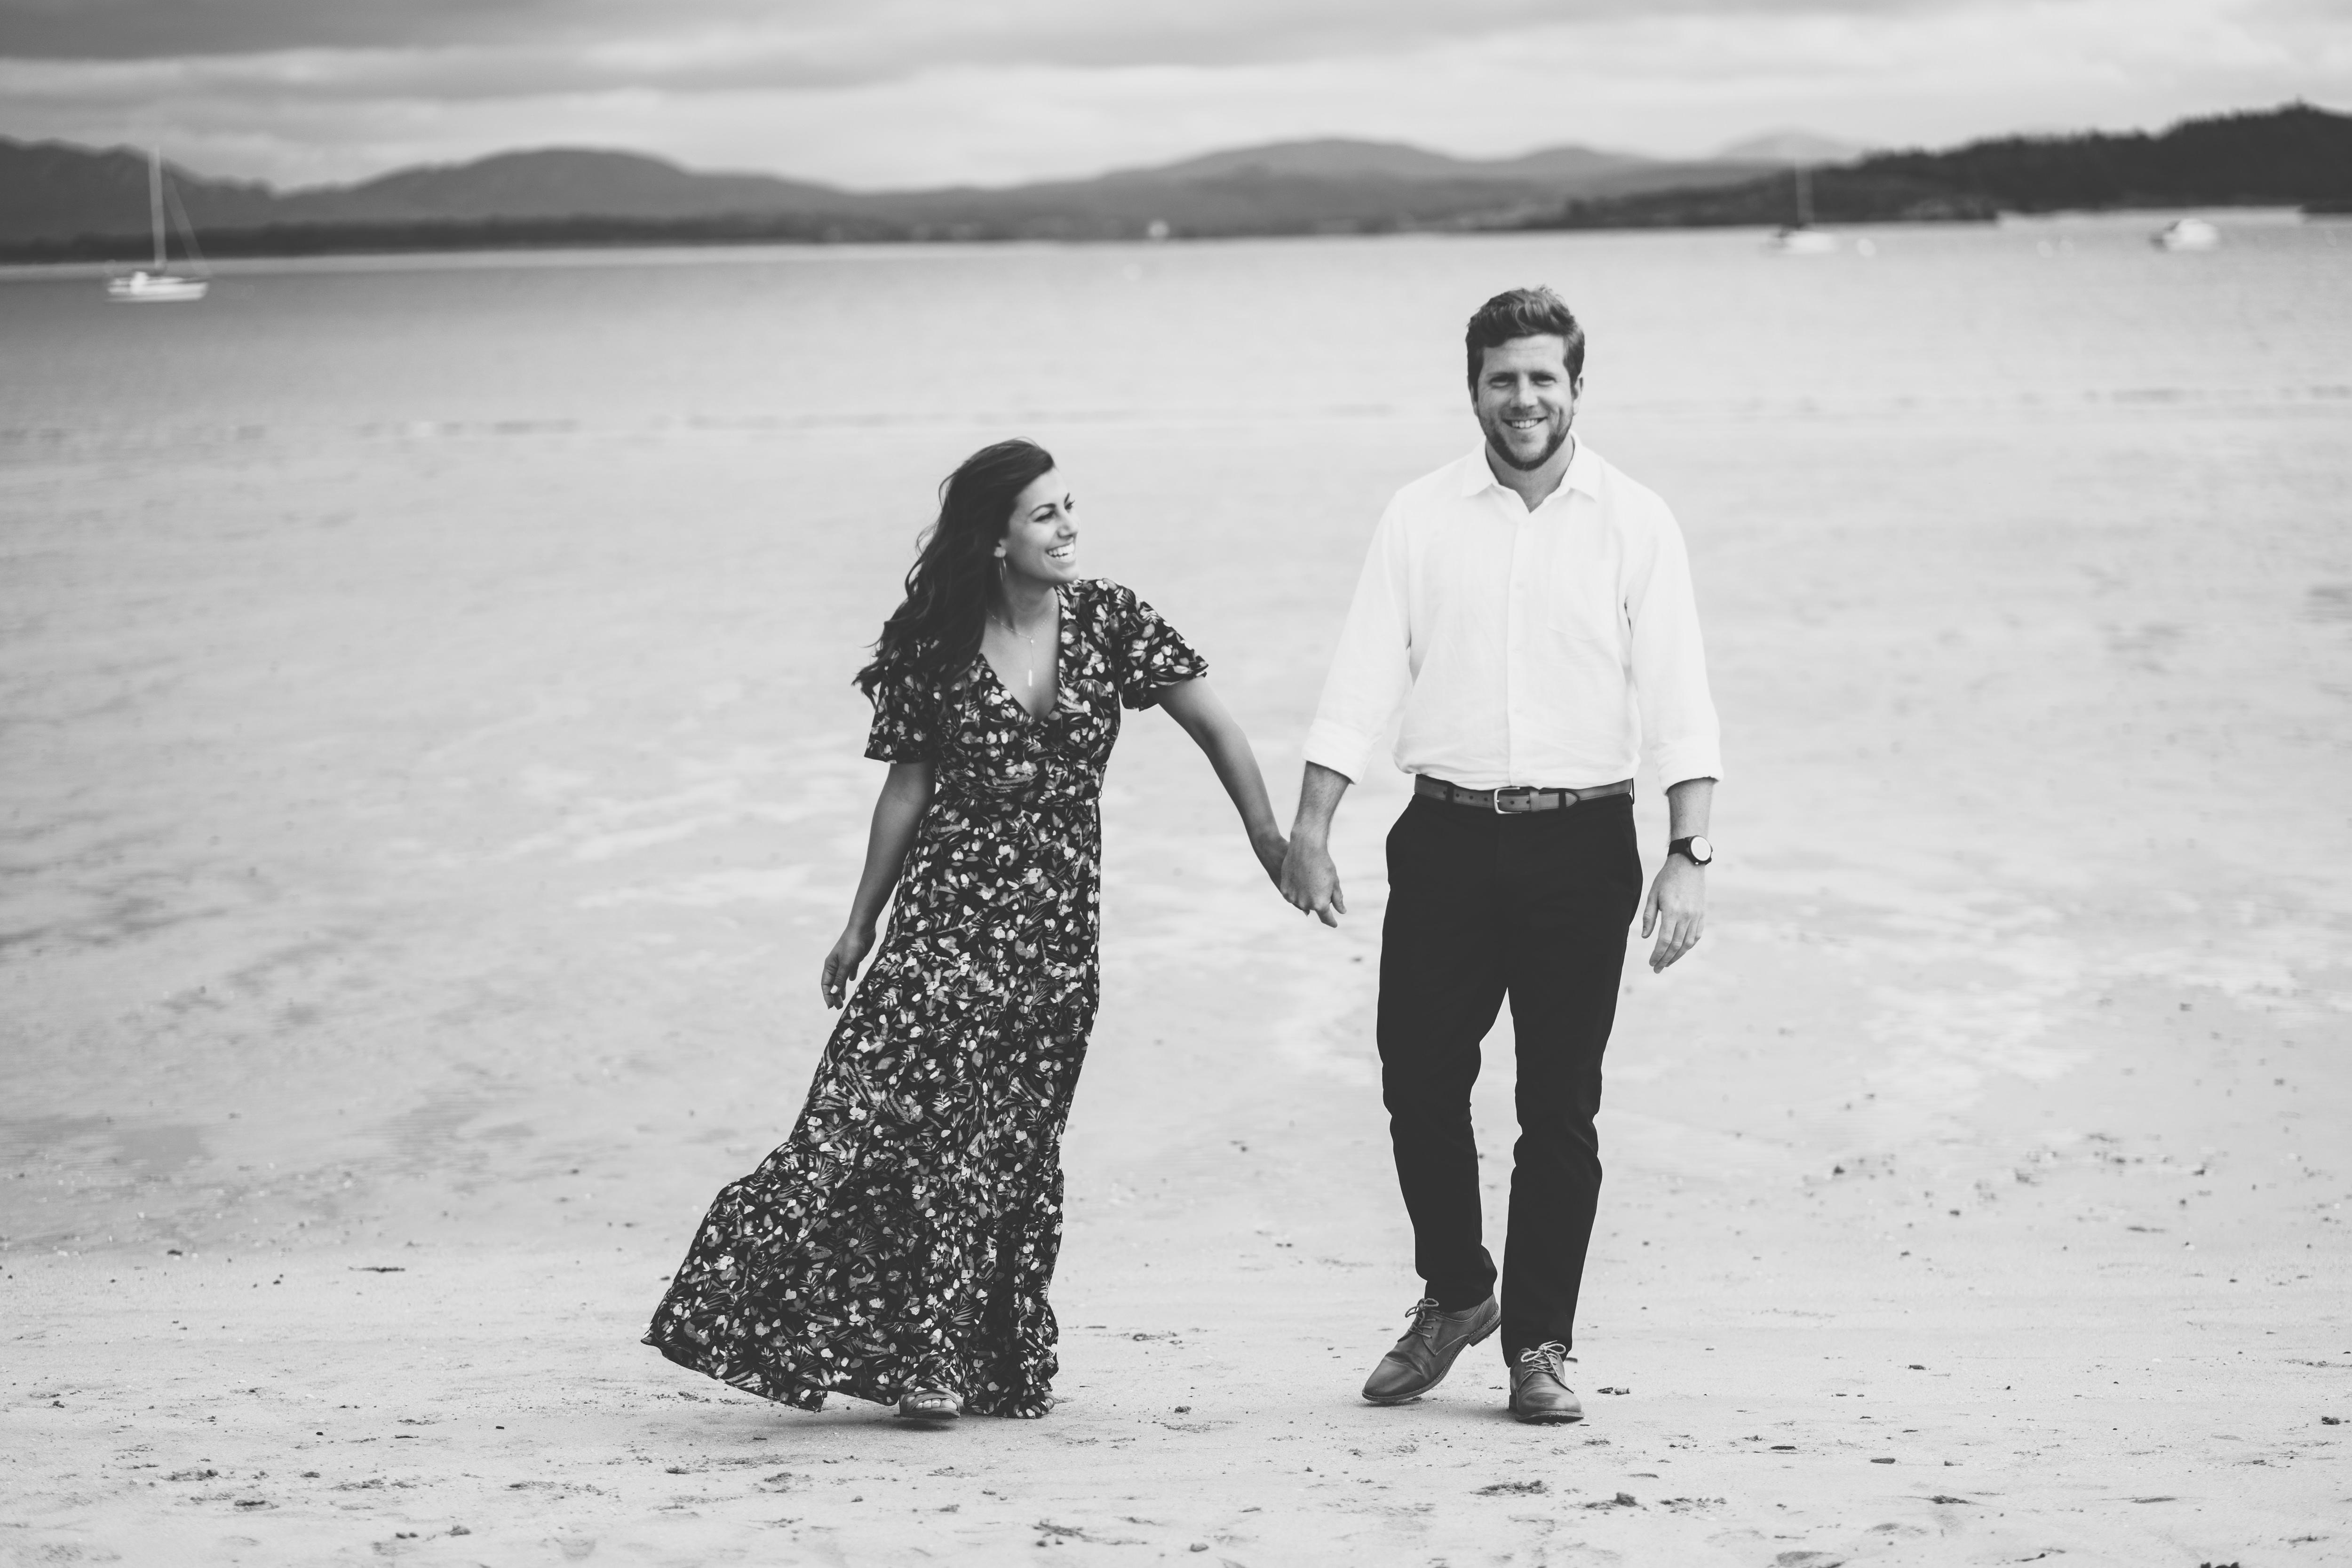 The Wedding Website of Deanna Smith and Declan Coll